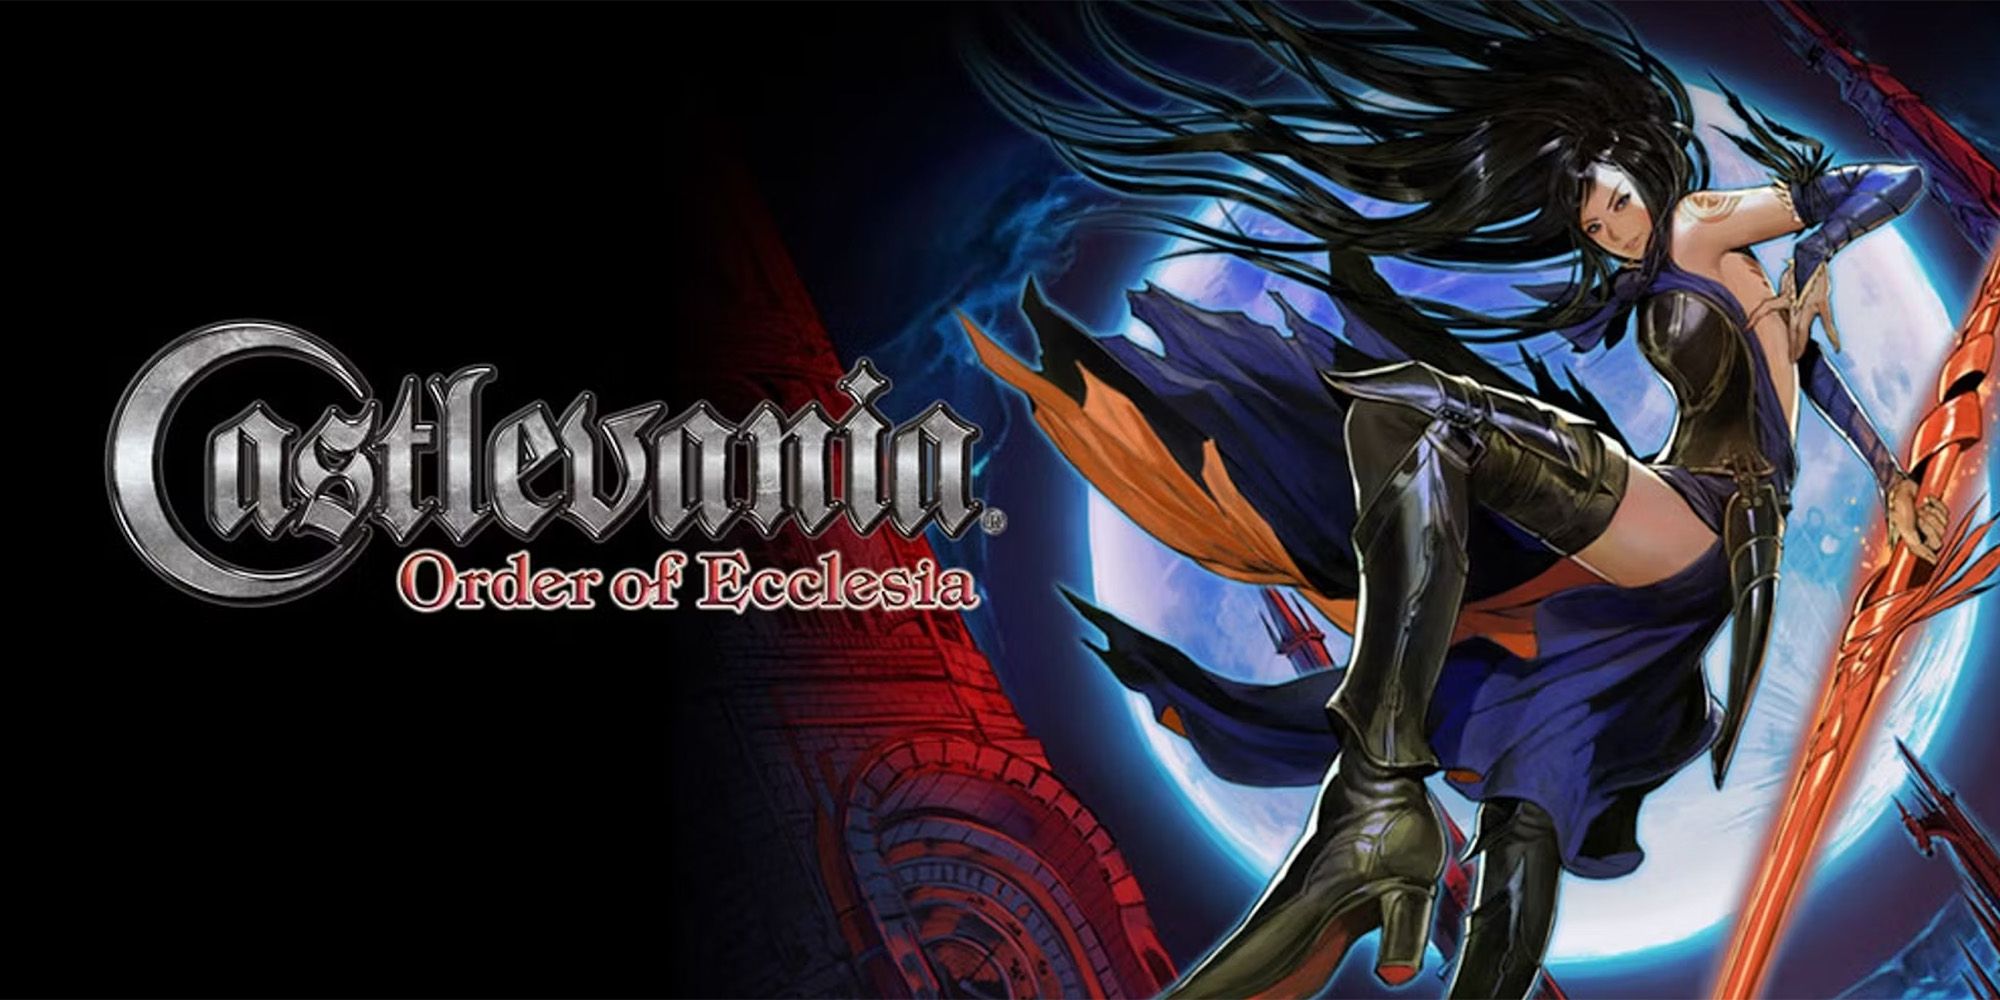 Castlevania Order Of Ecclesia: Shanoa in front of the moon